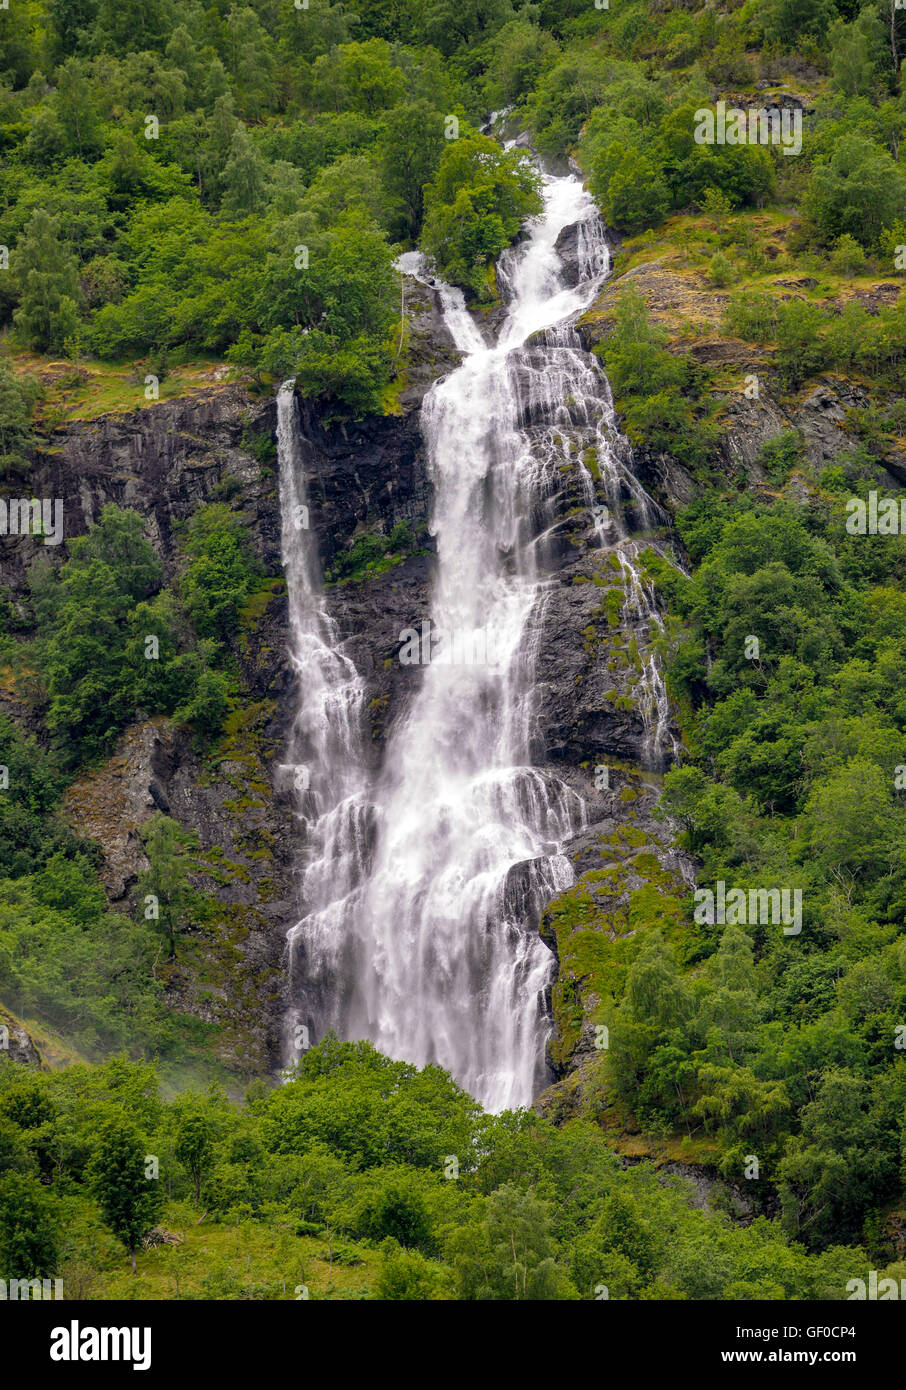 Cascading Waterfalls, Pictures taken from Flam Train, Flam, Norway, Scandanavia, European Stock Photo